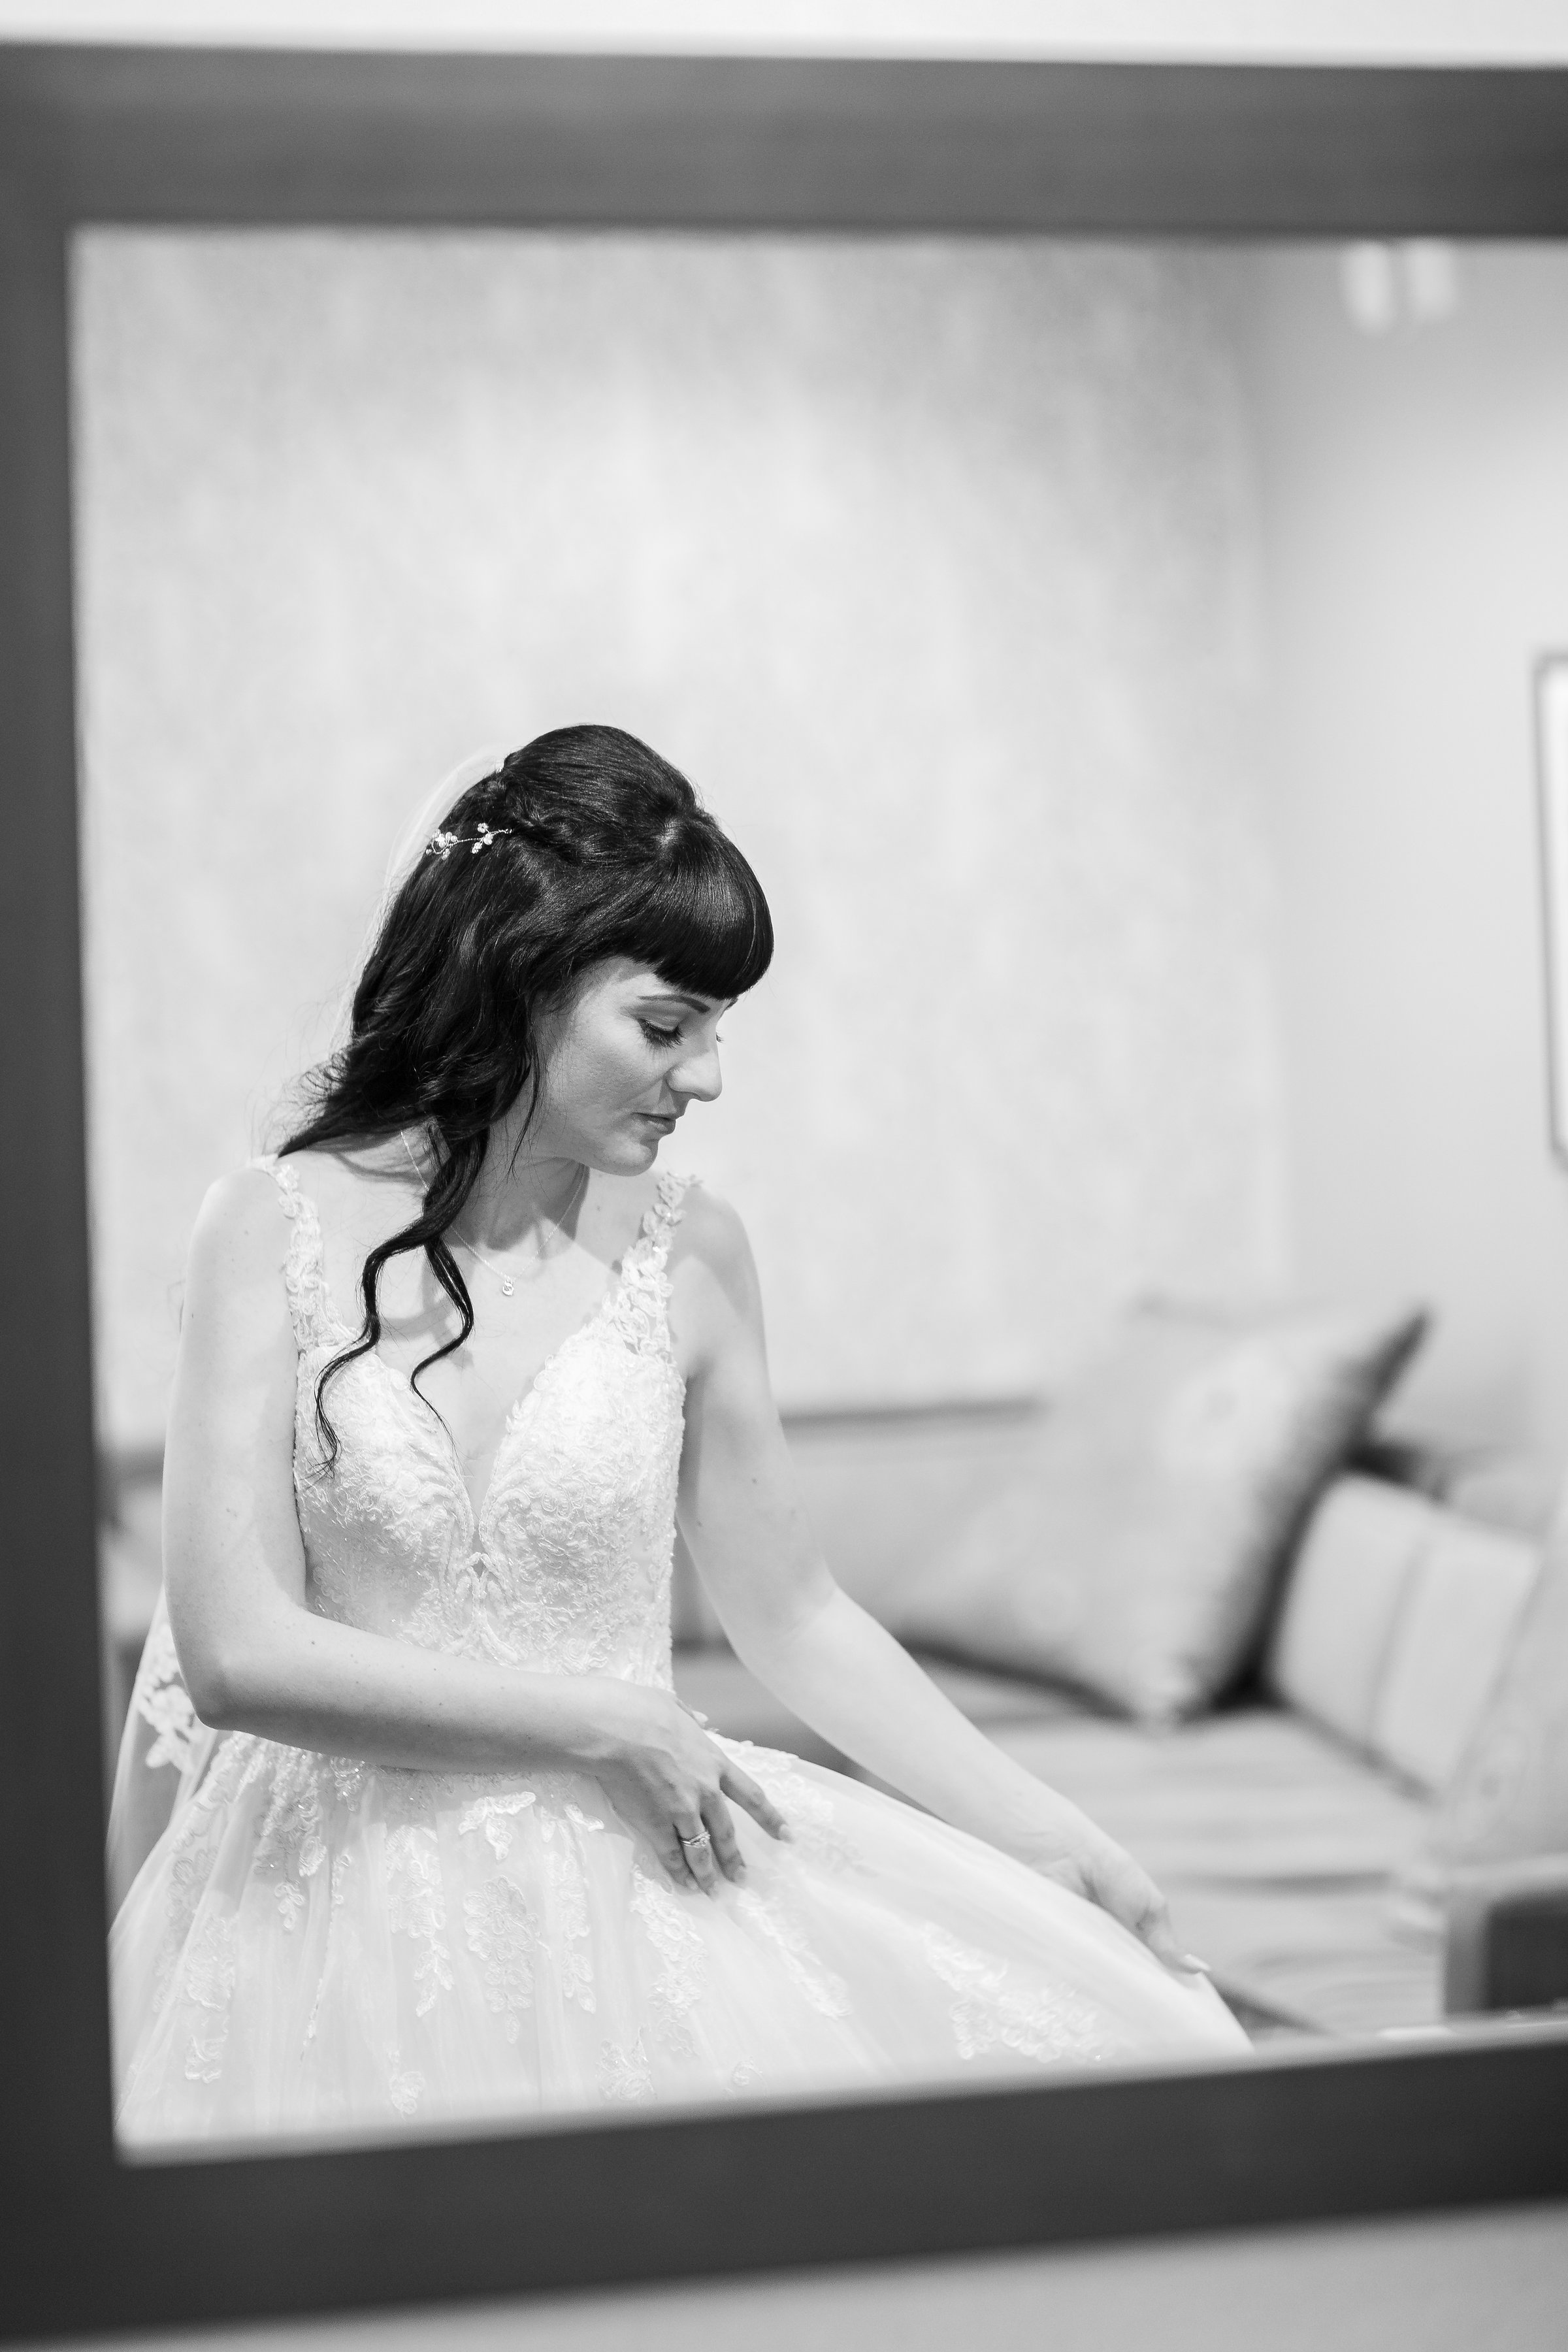 Photo of Bride fixing wedding dress while getting ready.jpg